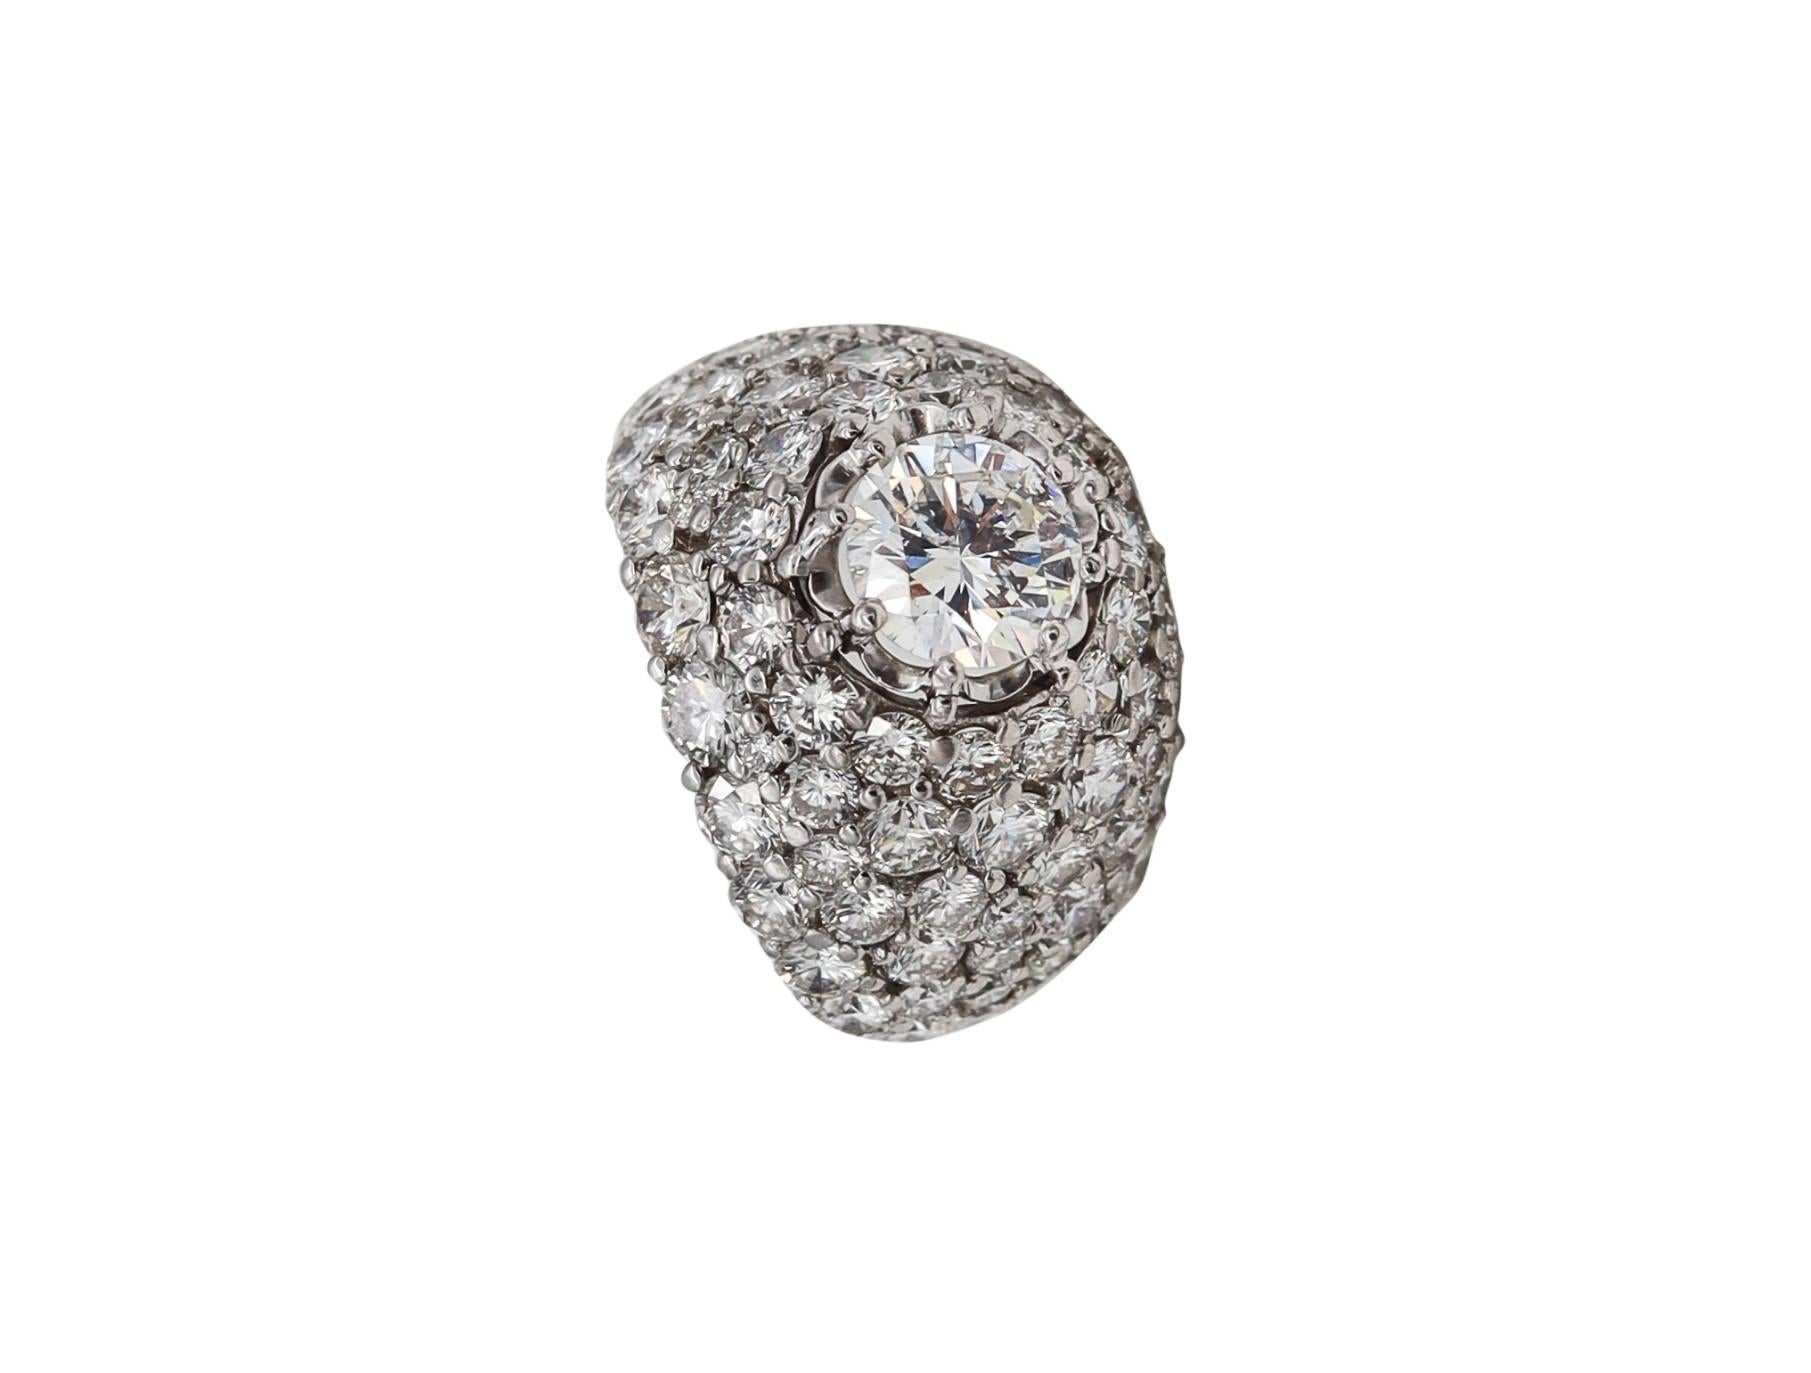 Yanes Exceptional Platinum Cluster Cocktail Ring Gia Certified 10.16 Ctw Diamond For Sale 7